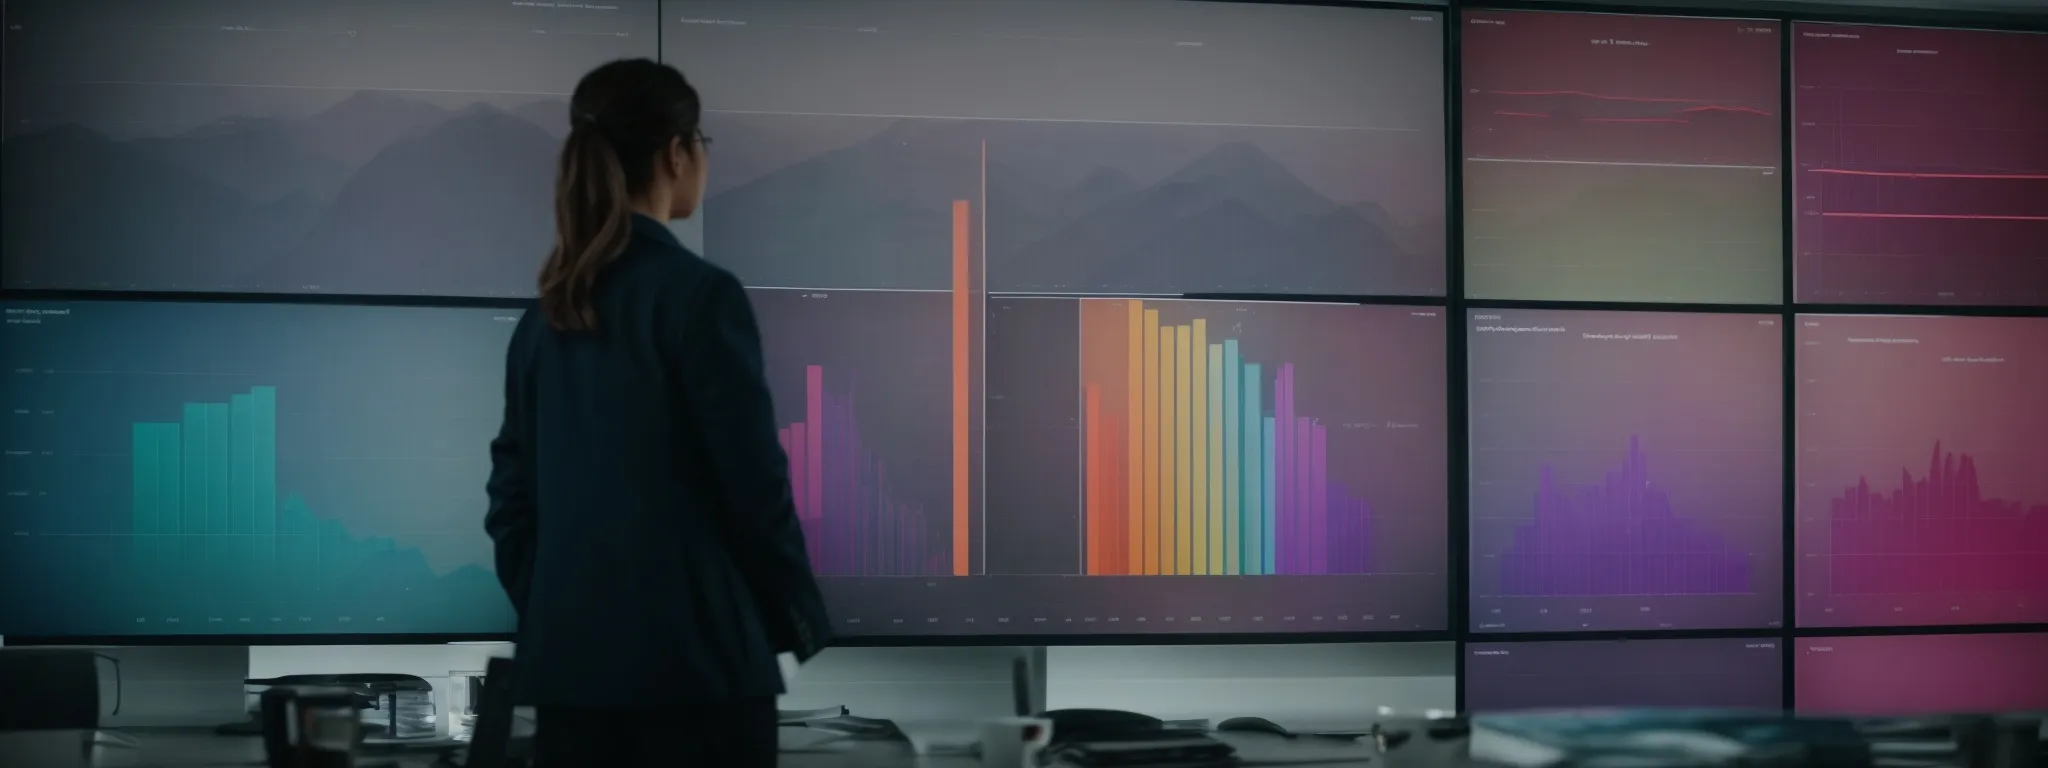 a person standing in front of a large screen displaying colorful bar graphs and pie charts, symbolizing data analysis in a modern office.